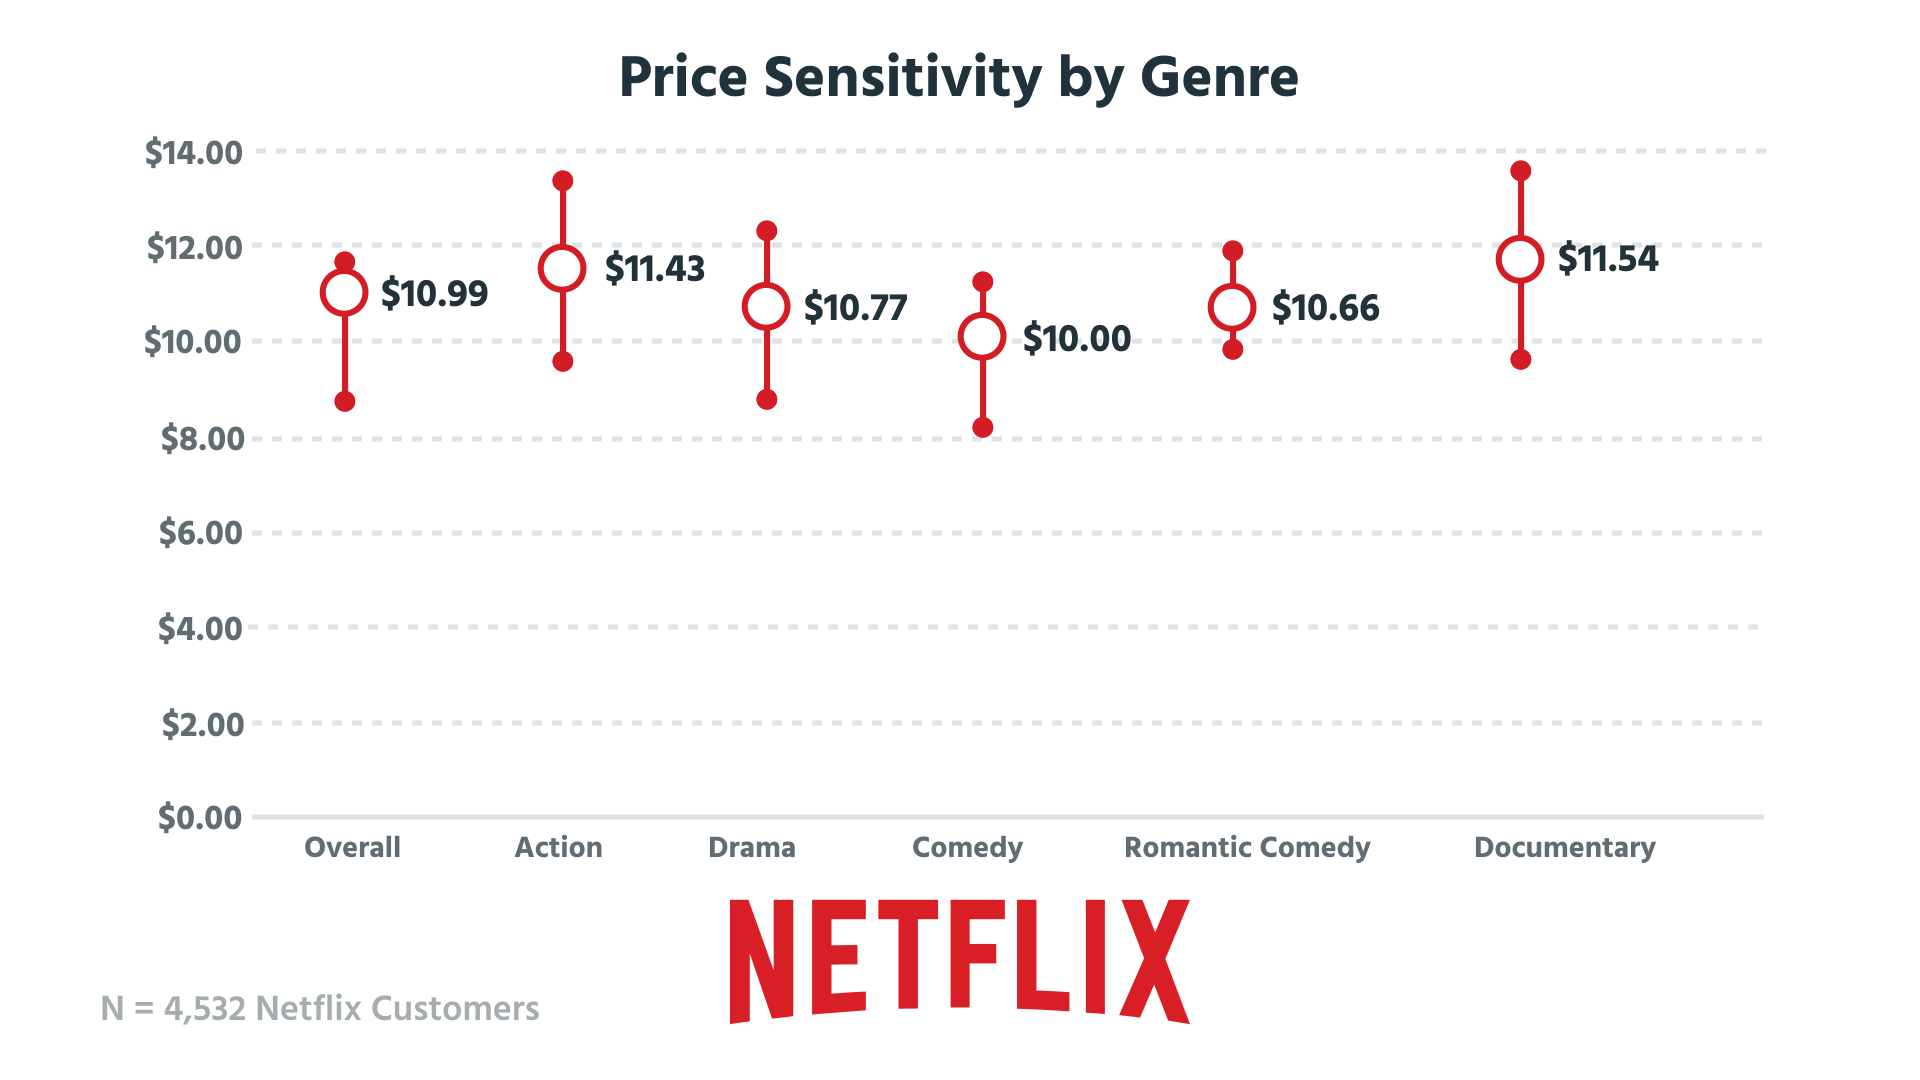 Here's how we tear apart Netflix's pricing